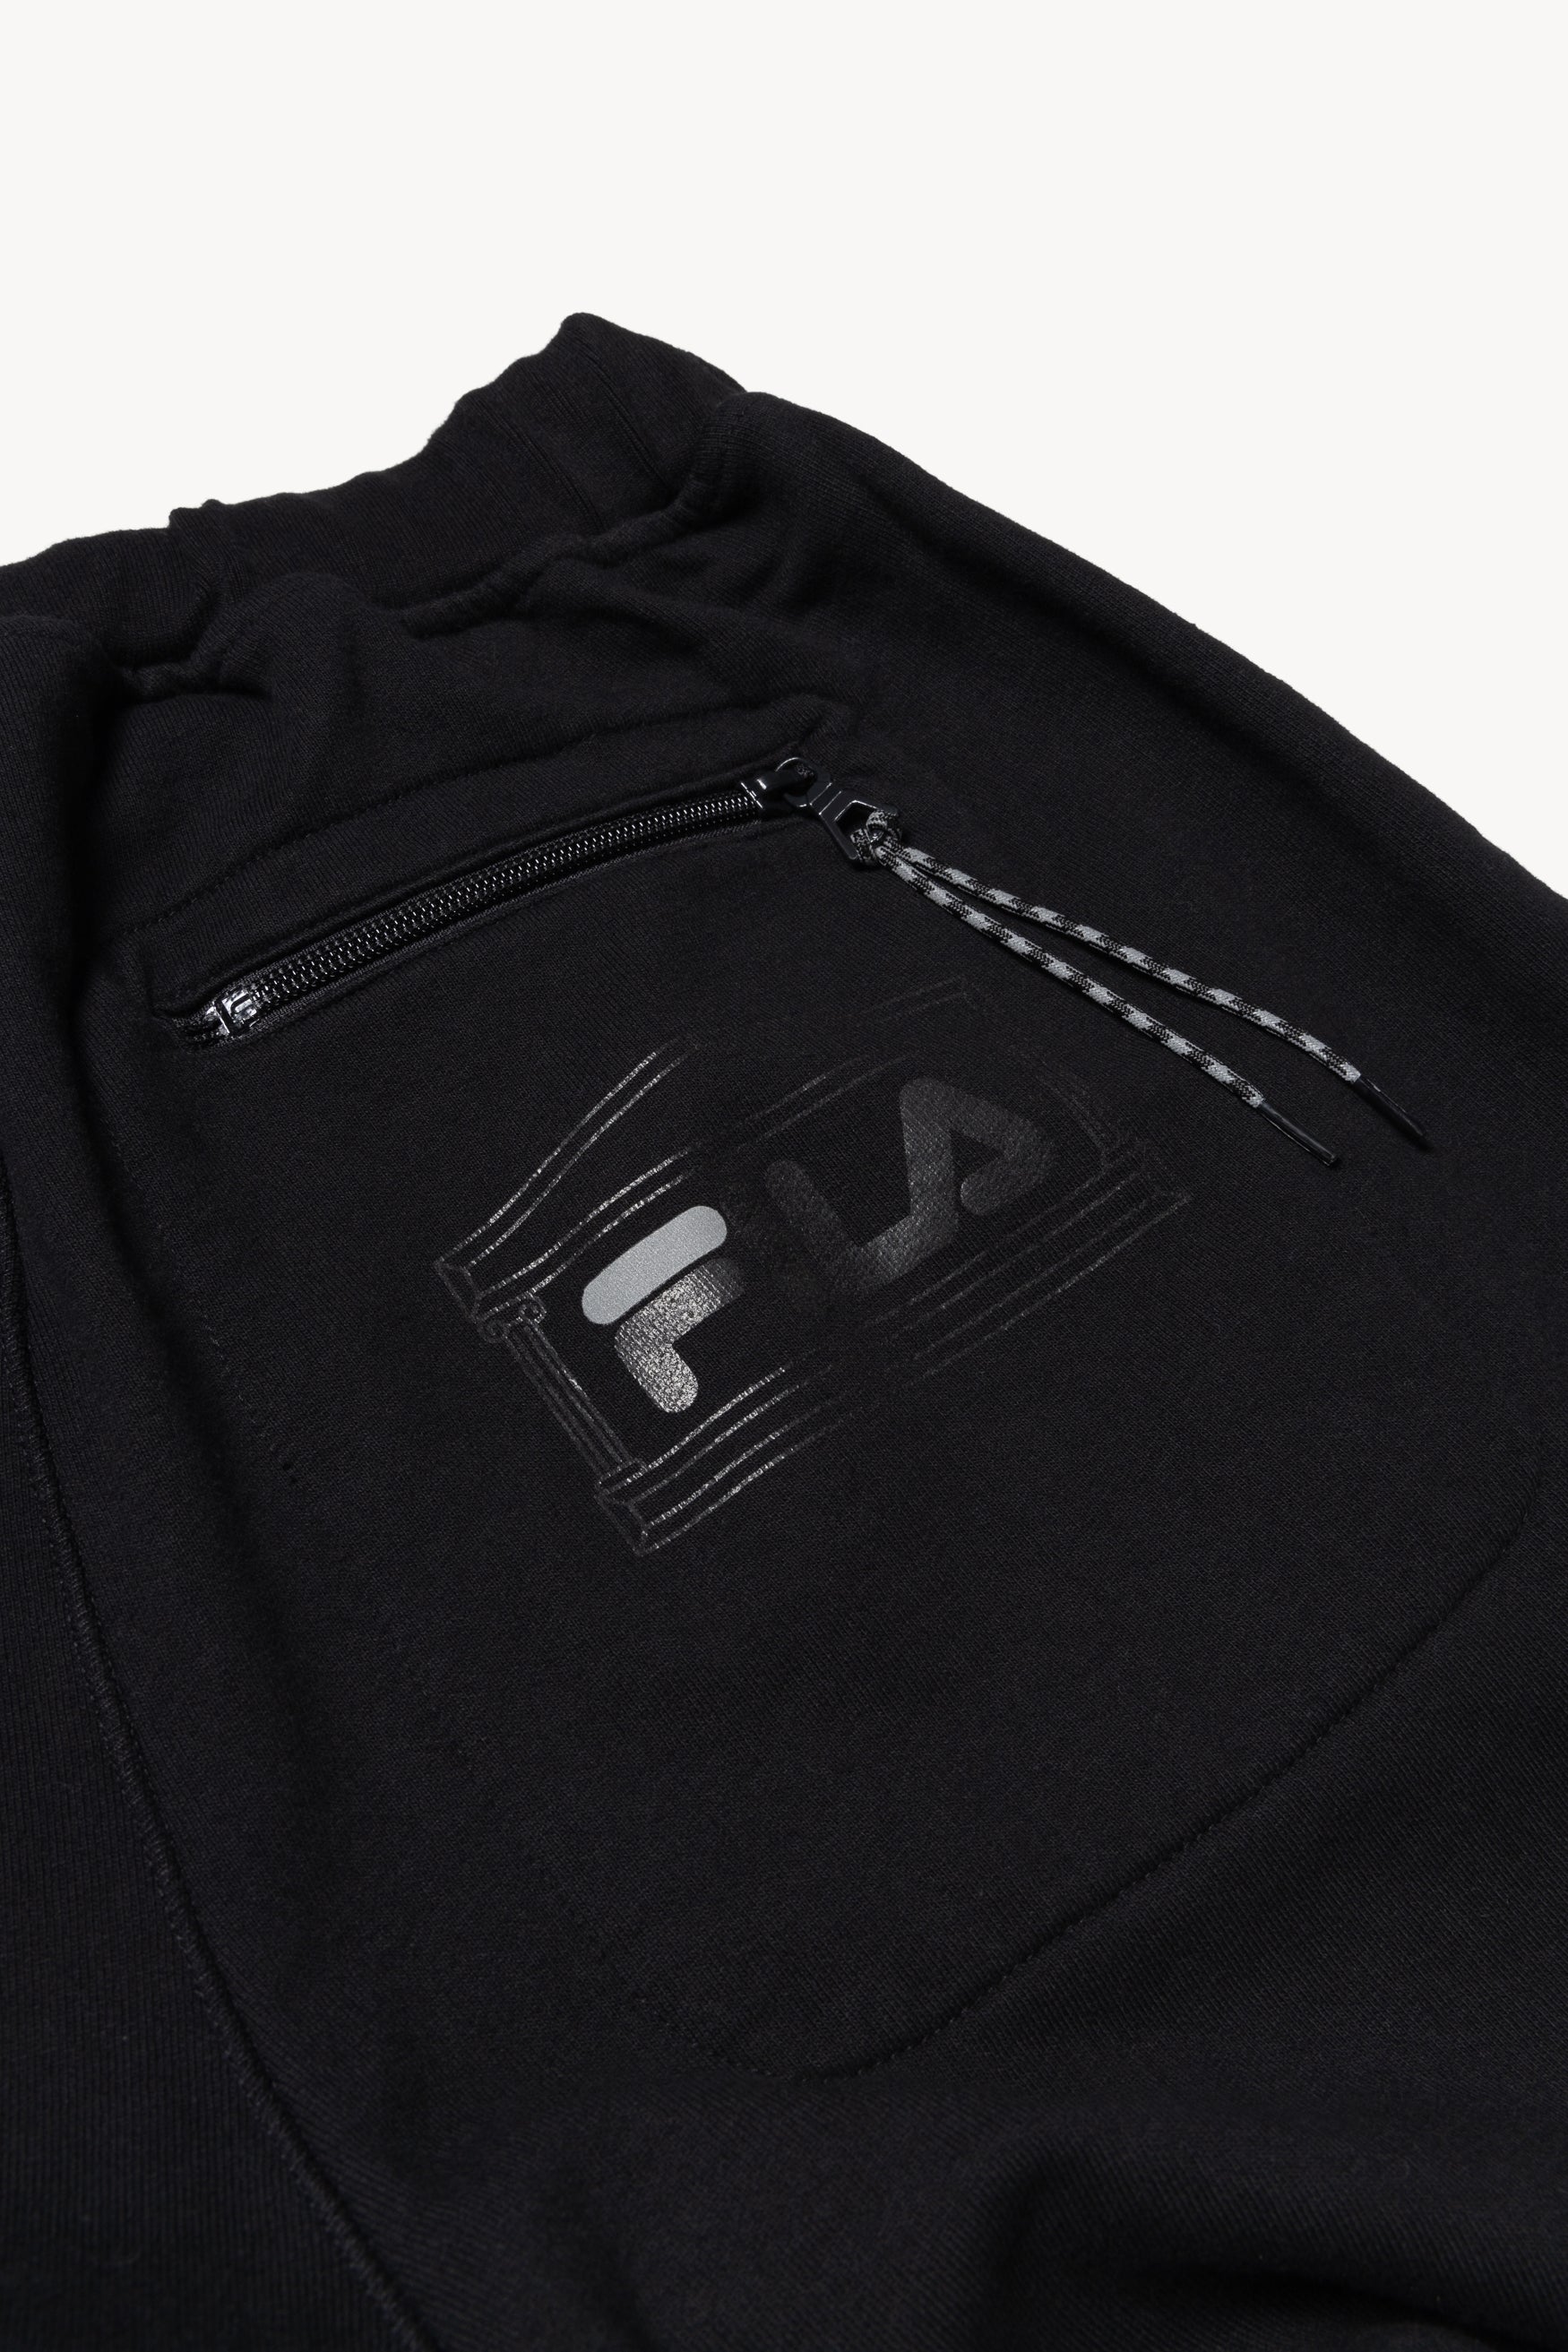 Load image into Gallery viewer, Fila Temple Sweatpant